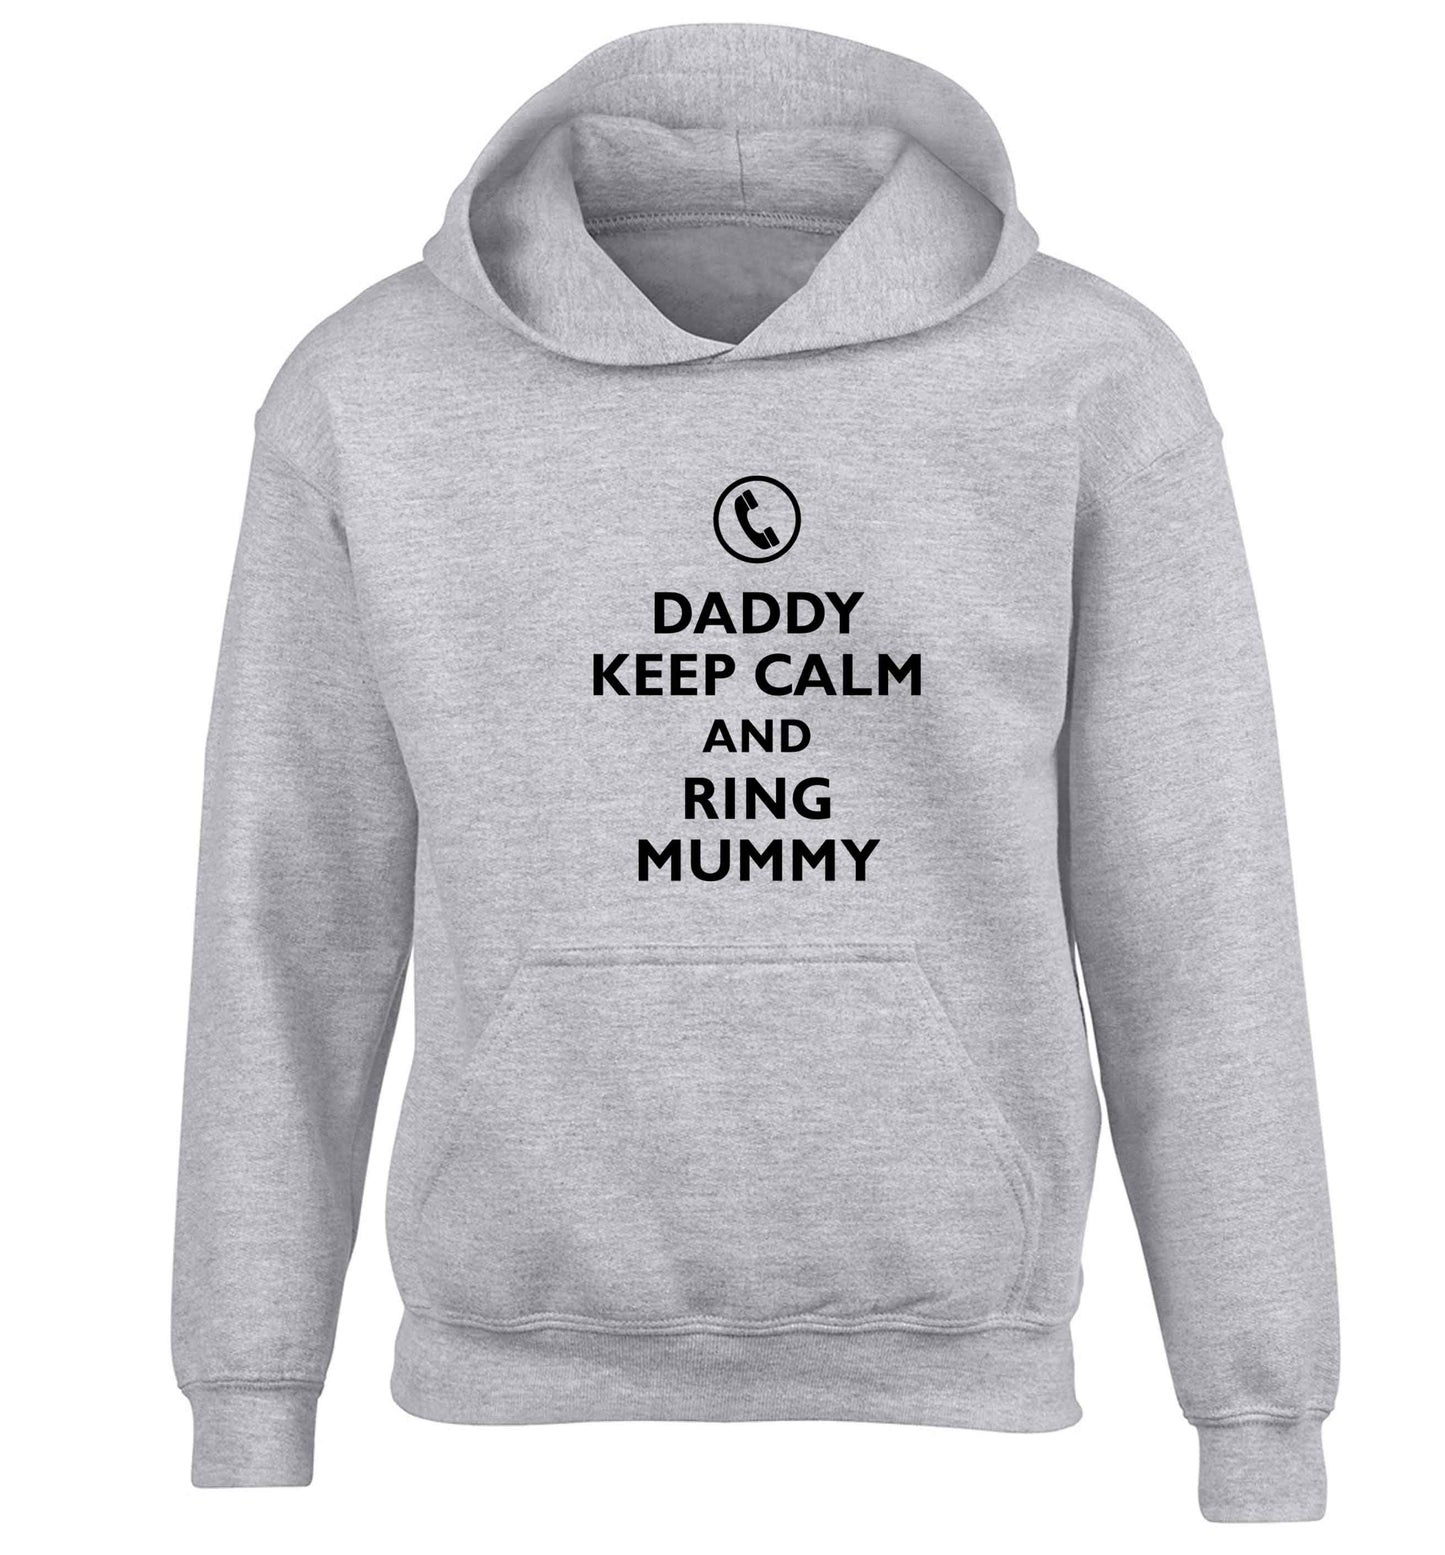 Daddy keep calm and ring mummy children's grey hoodie 12-13 Years